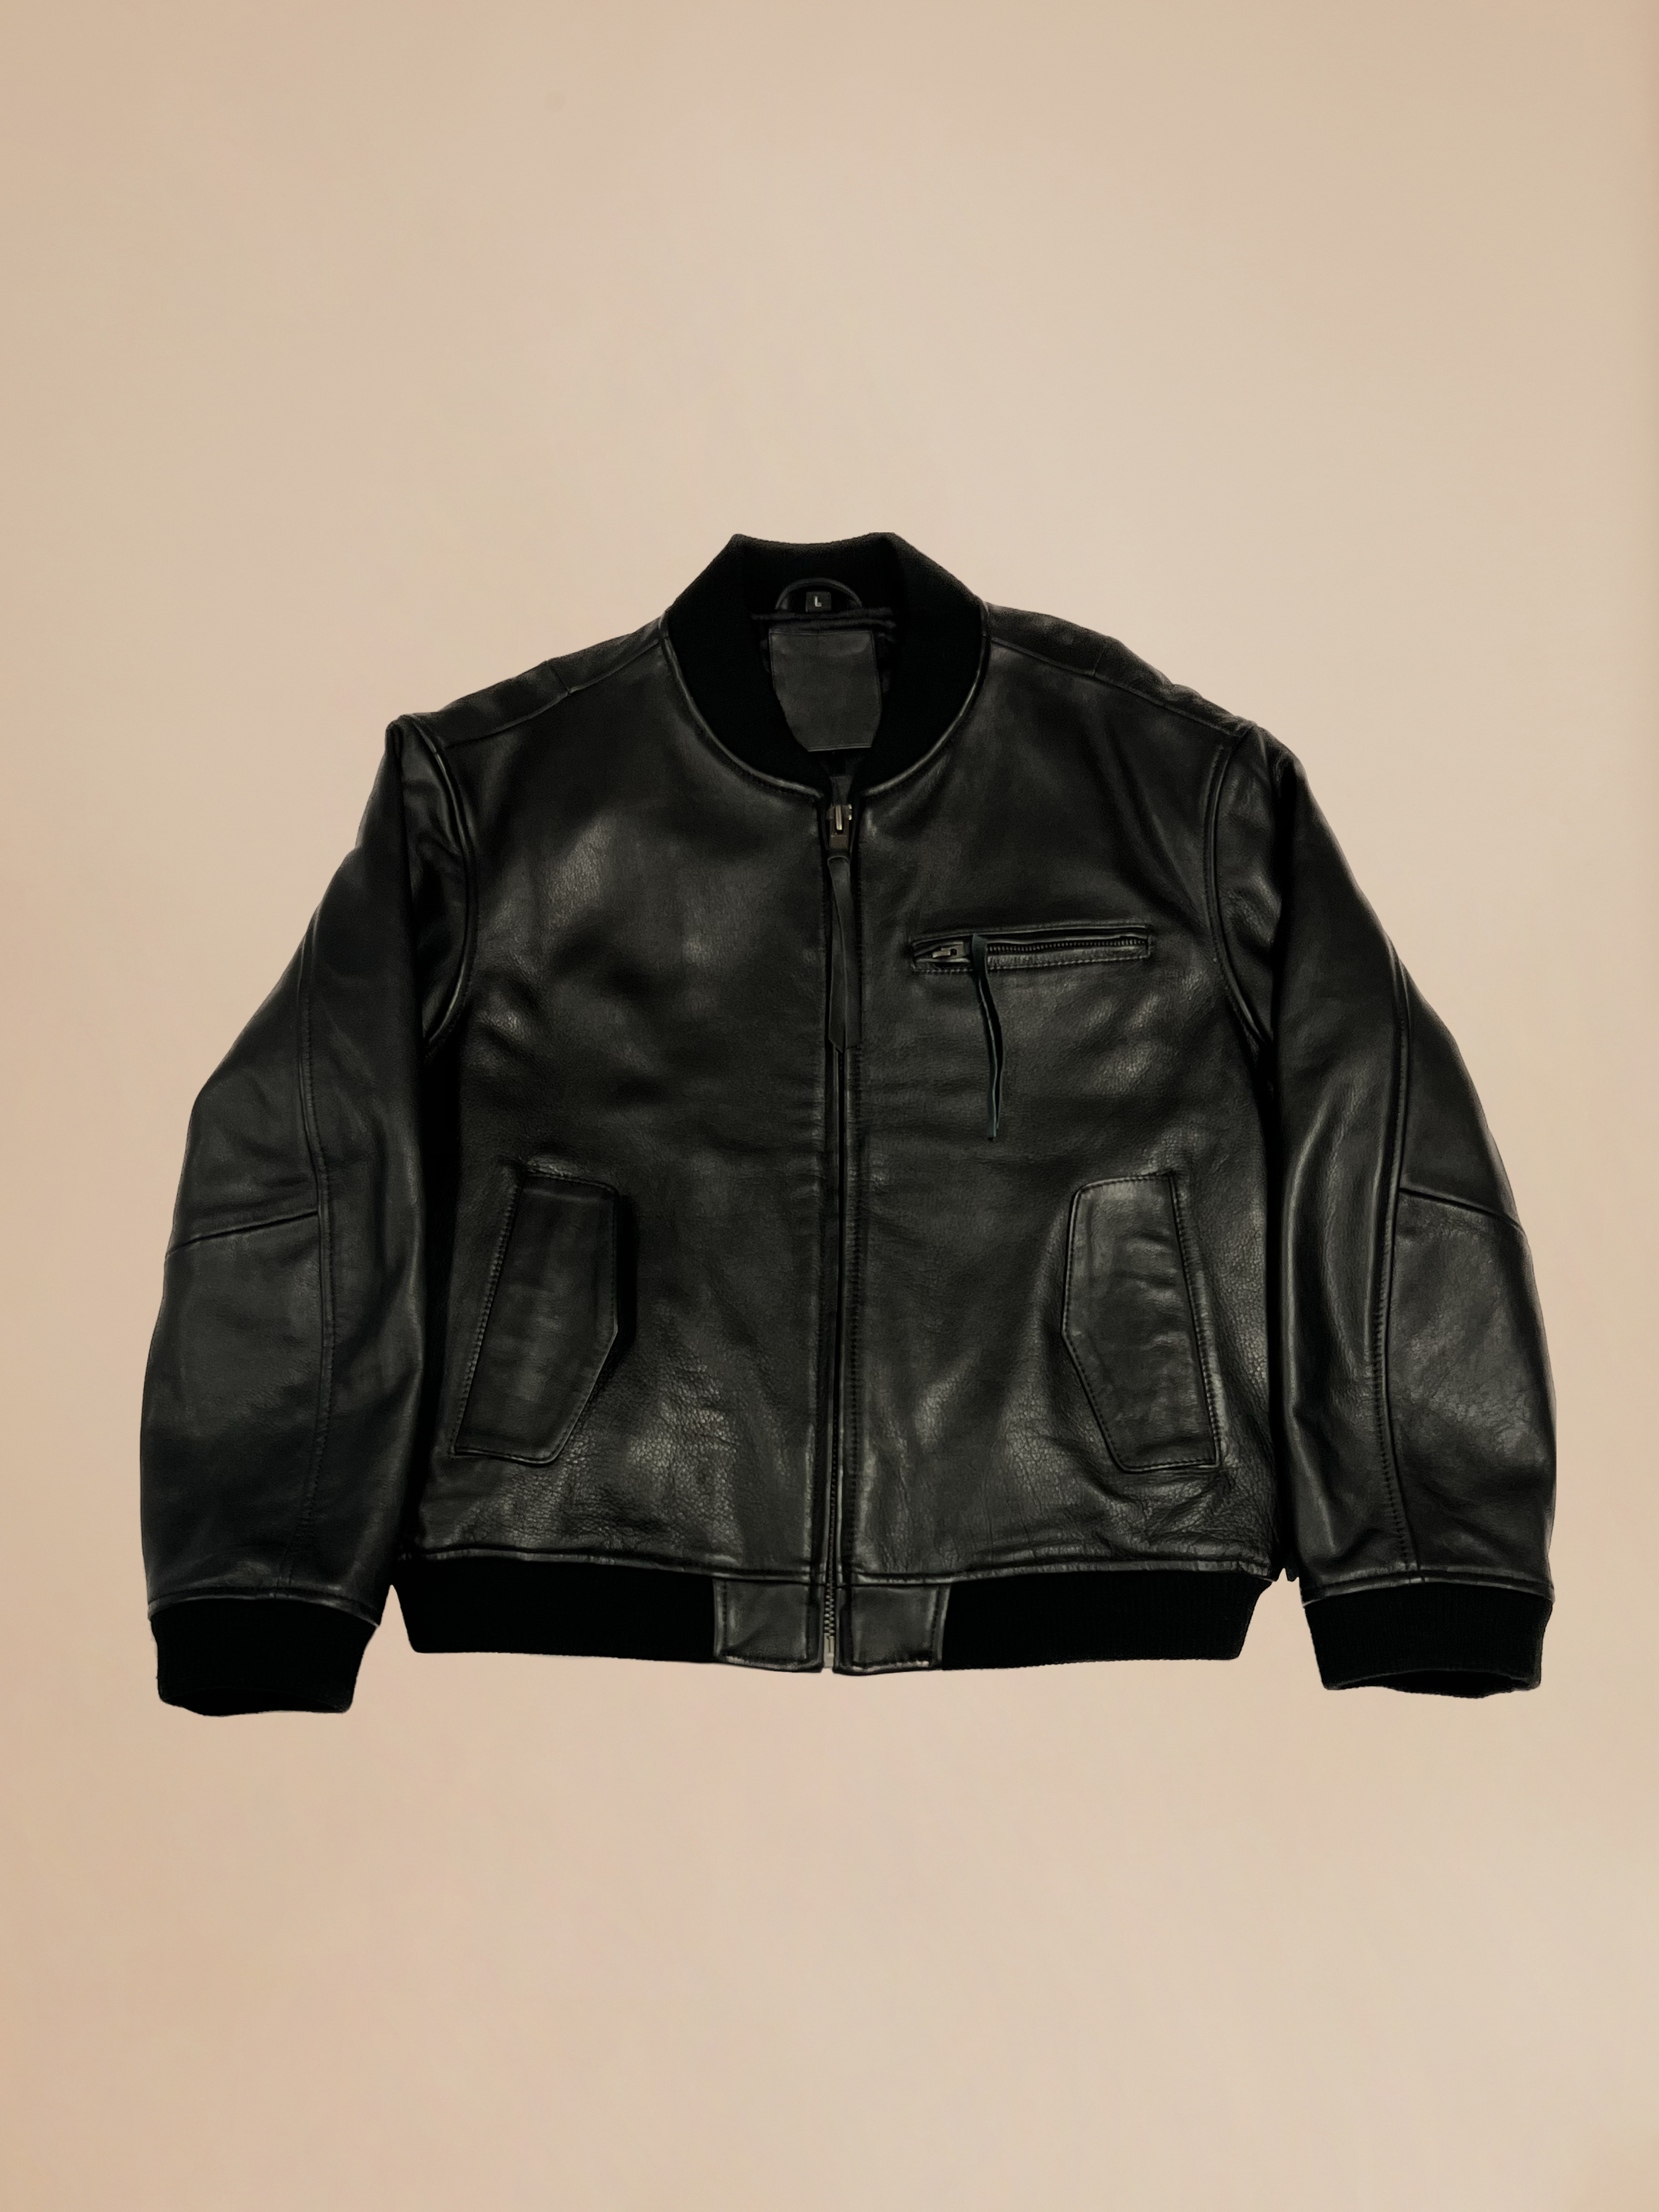 Leather Jackets in the color golden for Men on sale | FASHIOLA INDIA